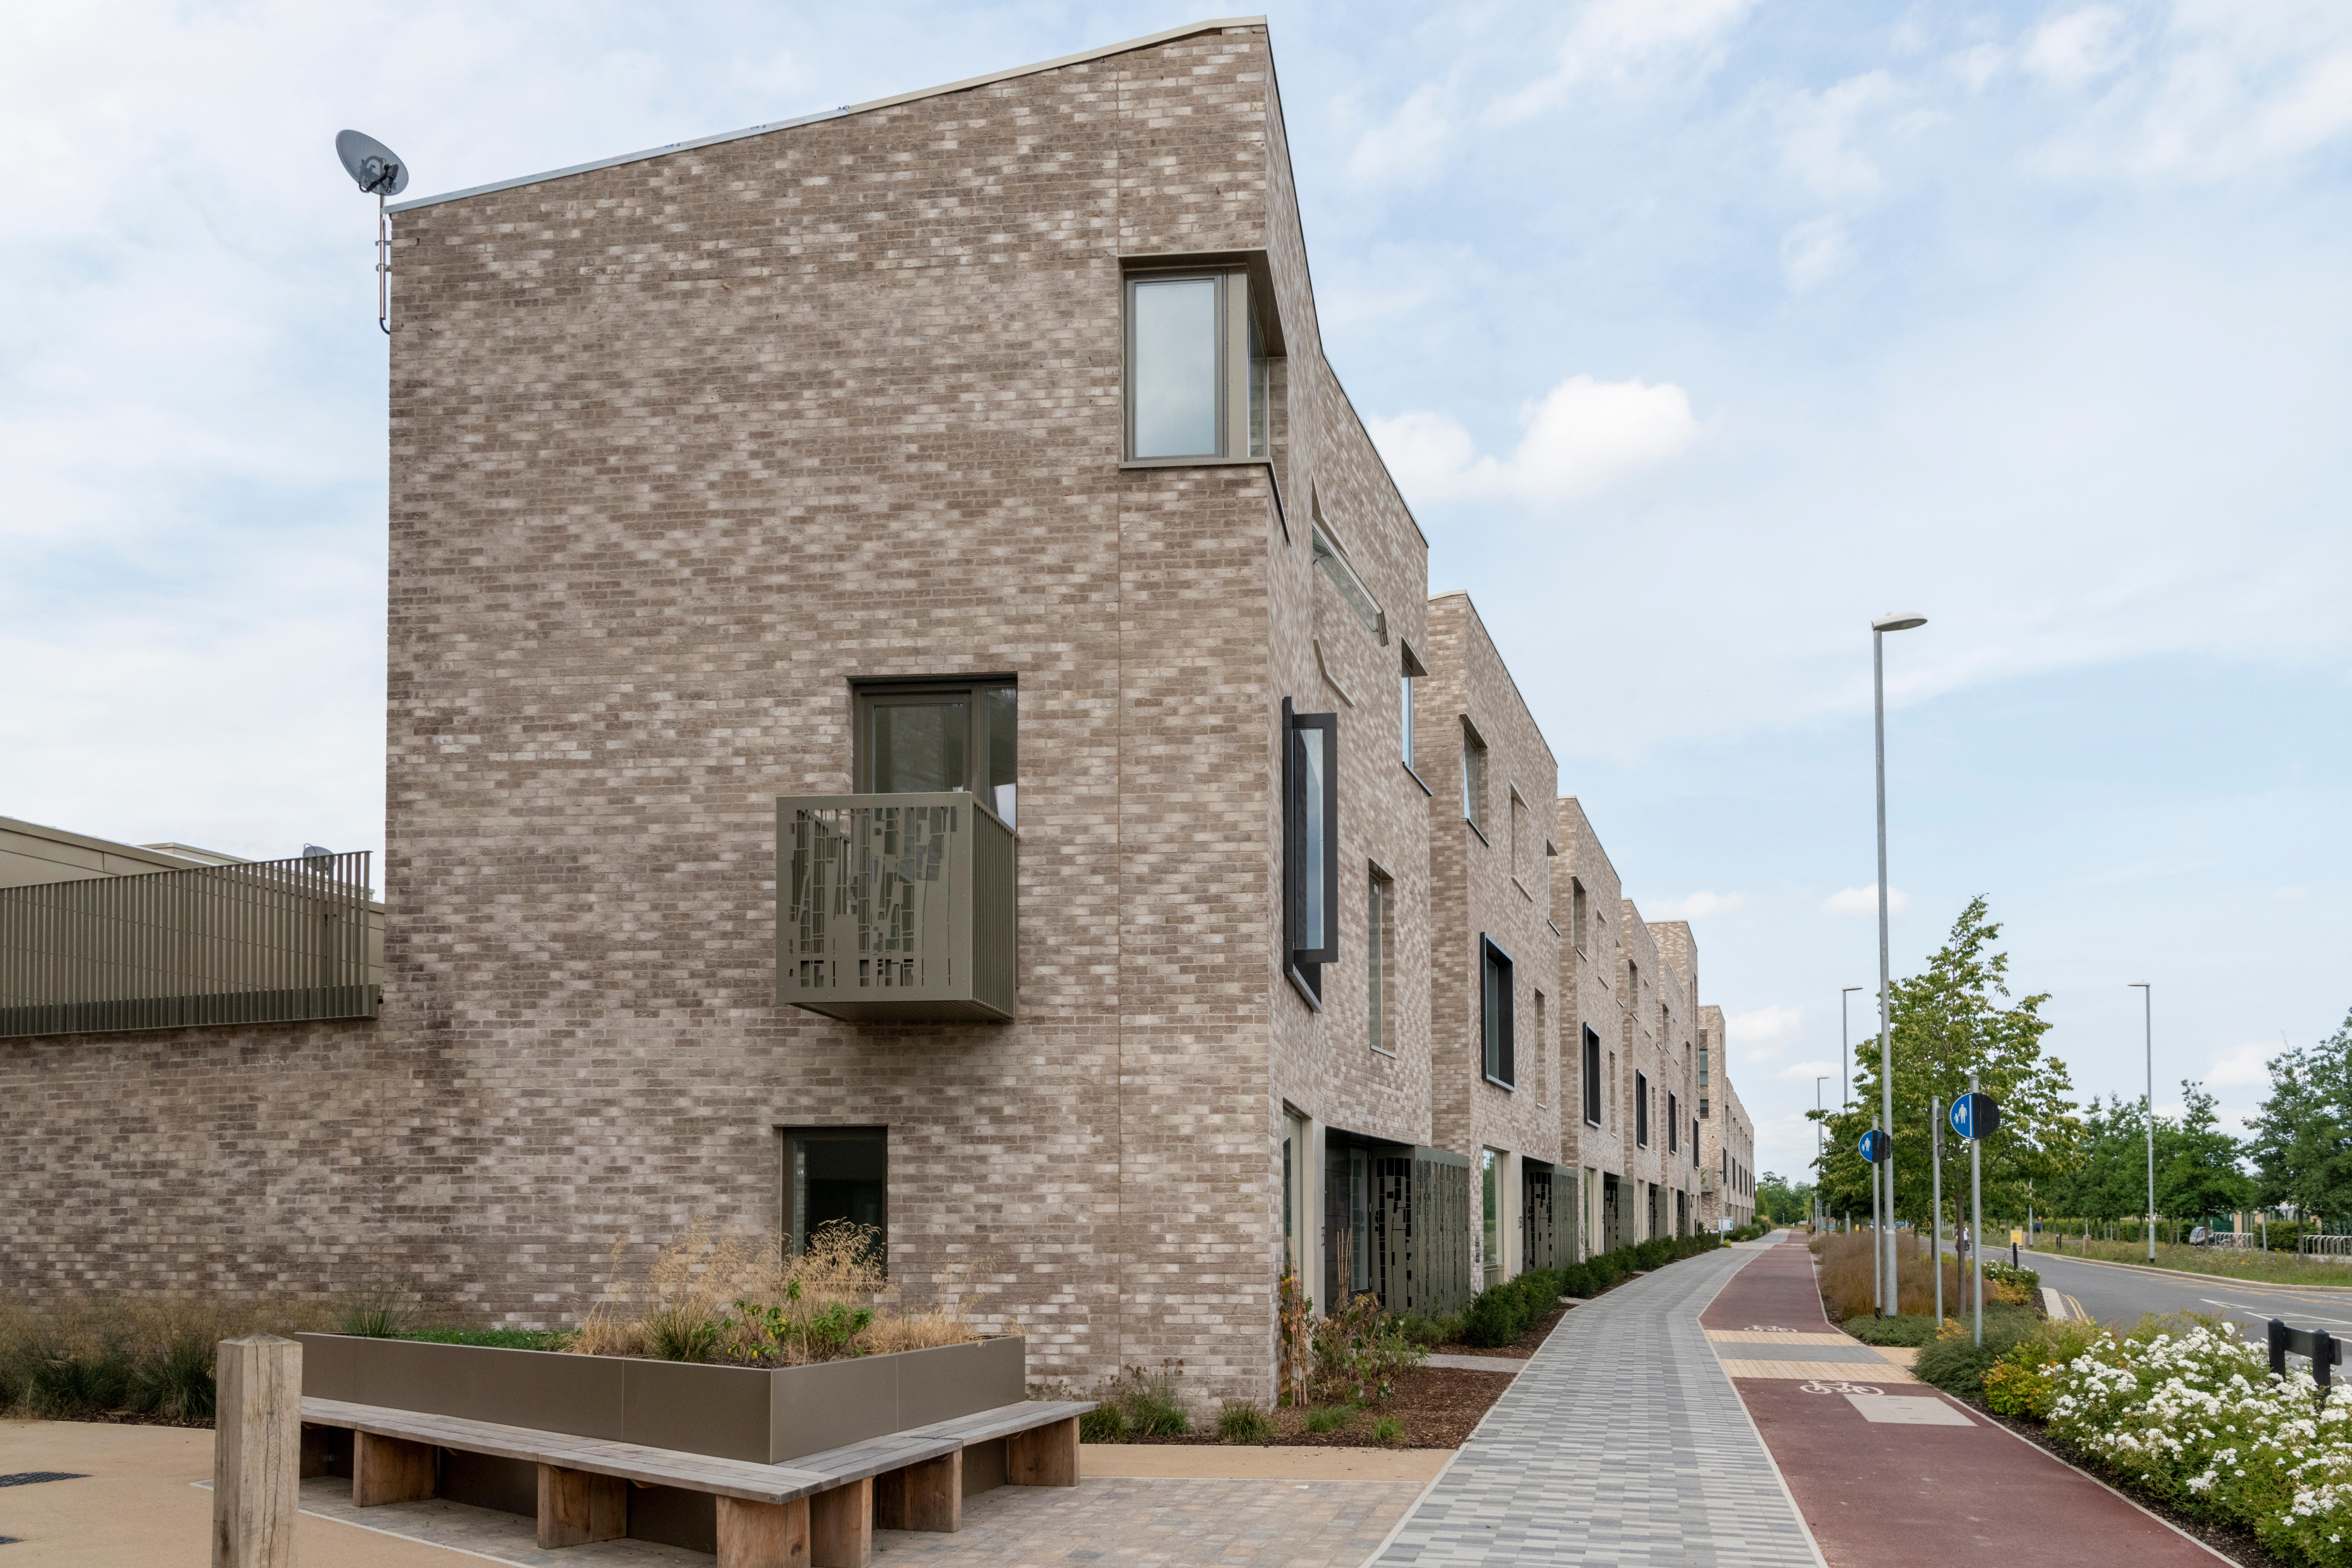 Houses at Eddington Cambridge with provision of walking and cycling infrastructure (Alamy/PA)